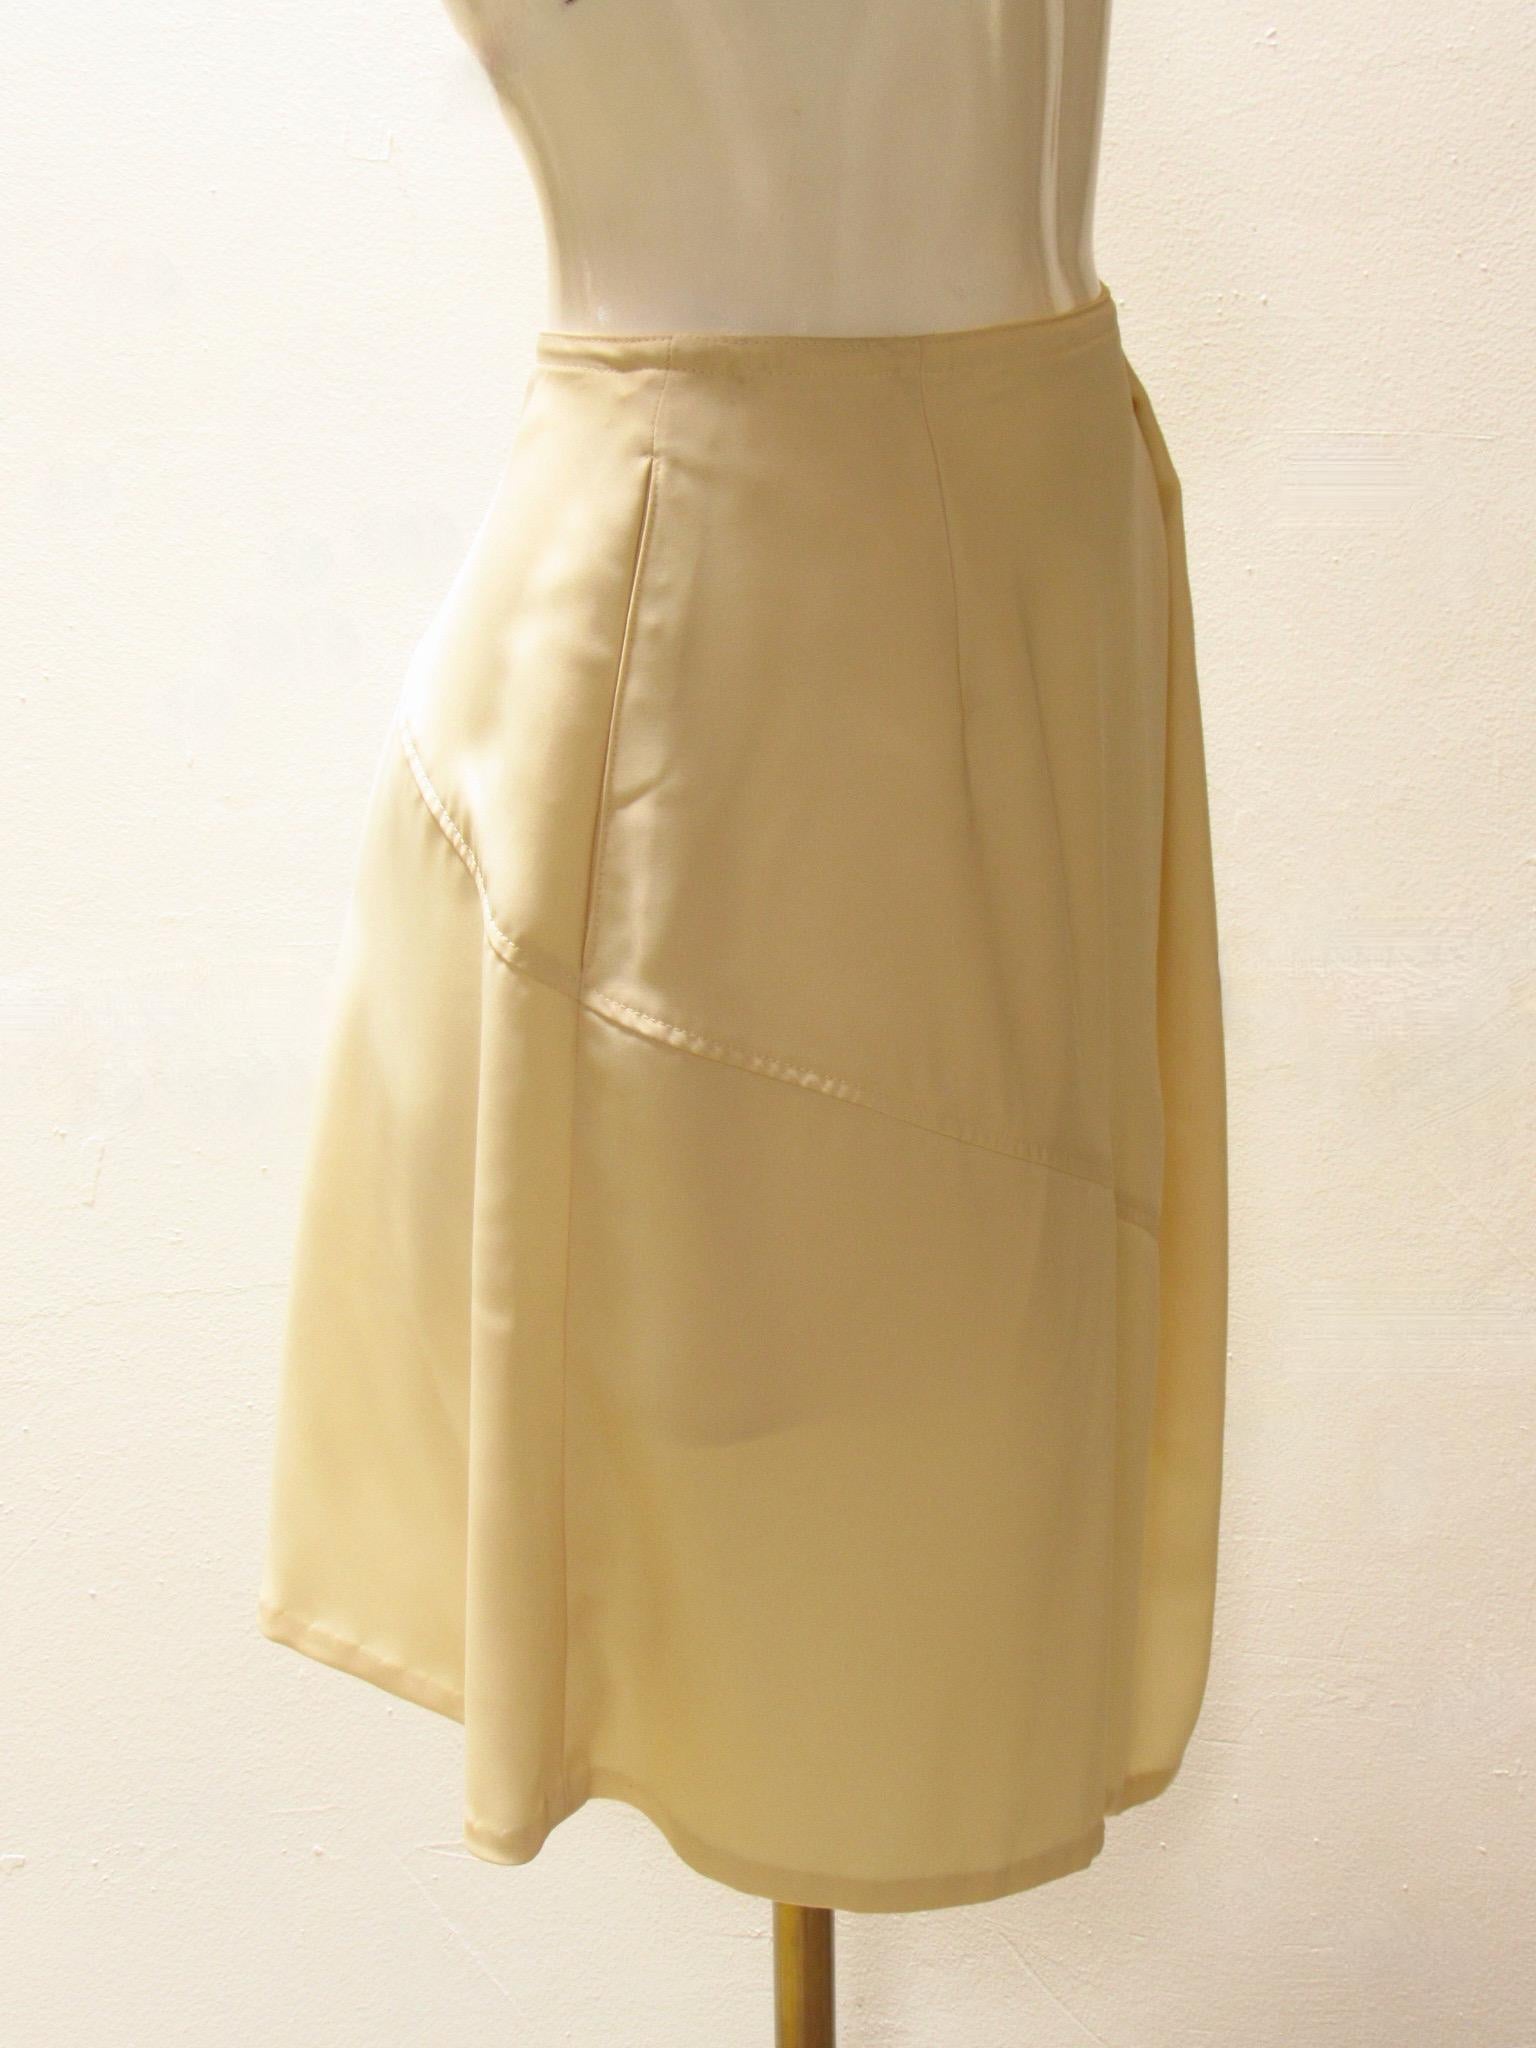 Matsuda Ivory Asymmetrical Skirt In New Condition For Sale In Laguna Beach, CA